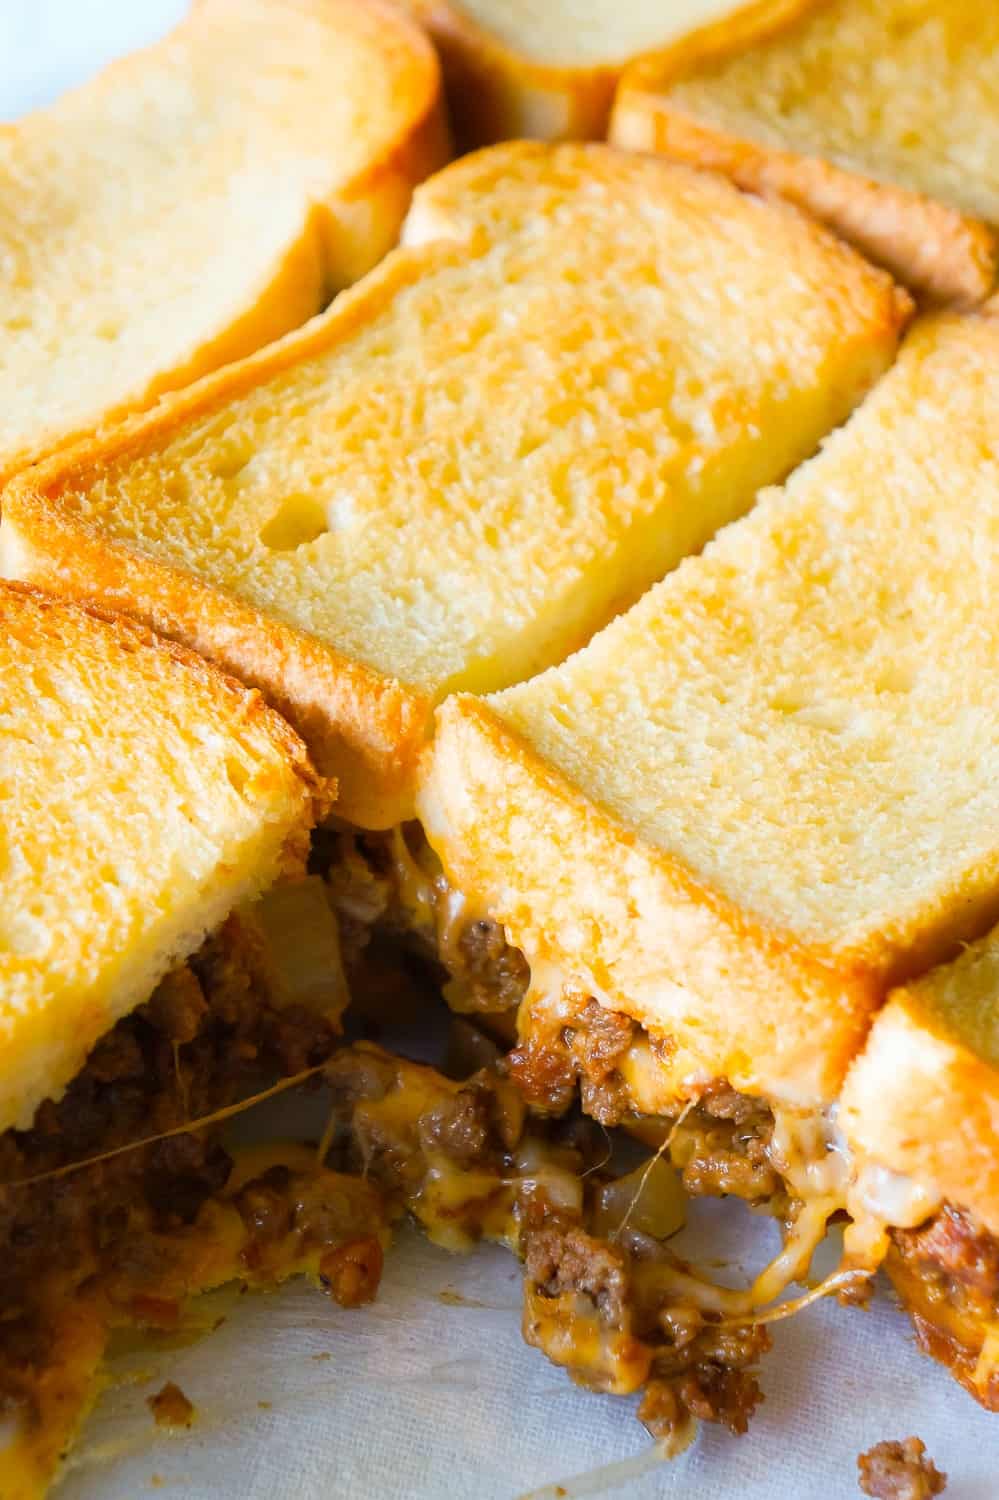 Bacon Cheeseburger Grilled Cheese Casserole is an easy dinner recipe the whole family will love. This delicious casserole is loaded with ground beef, bacon, onions and cheese sandwiched between layers of bread.